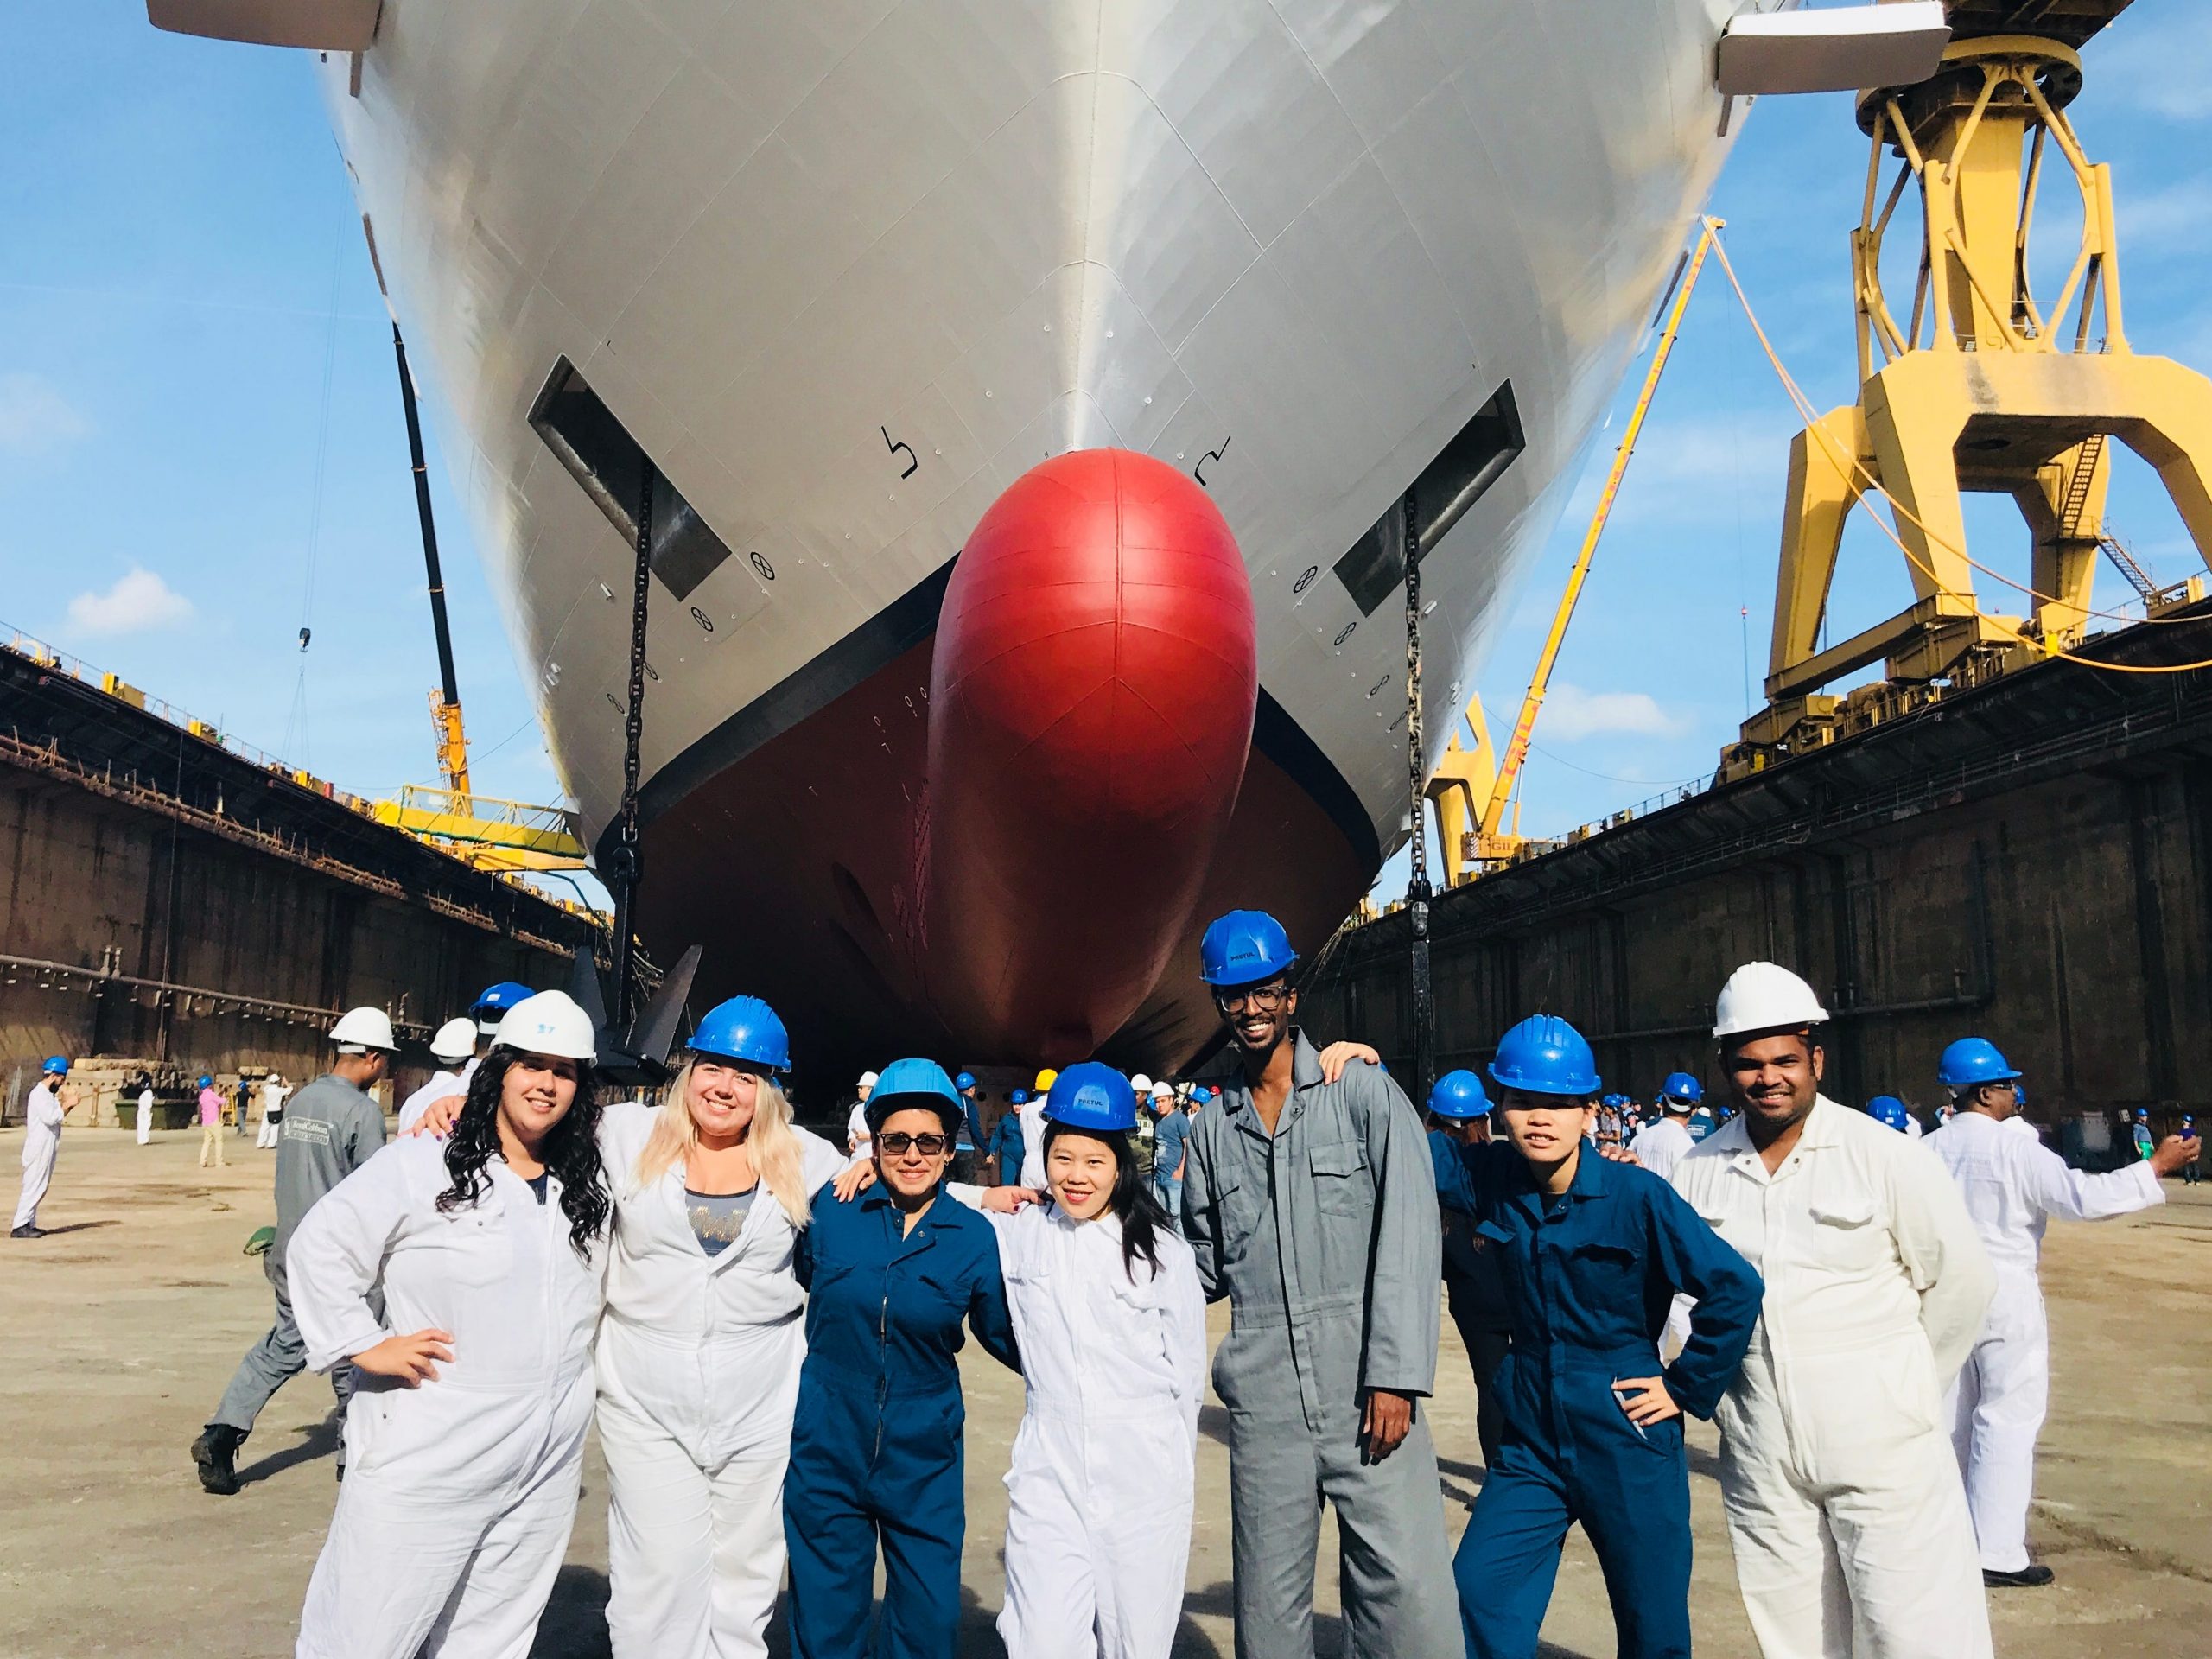 Cruise ship employees standing in front of the boat